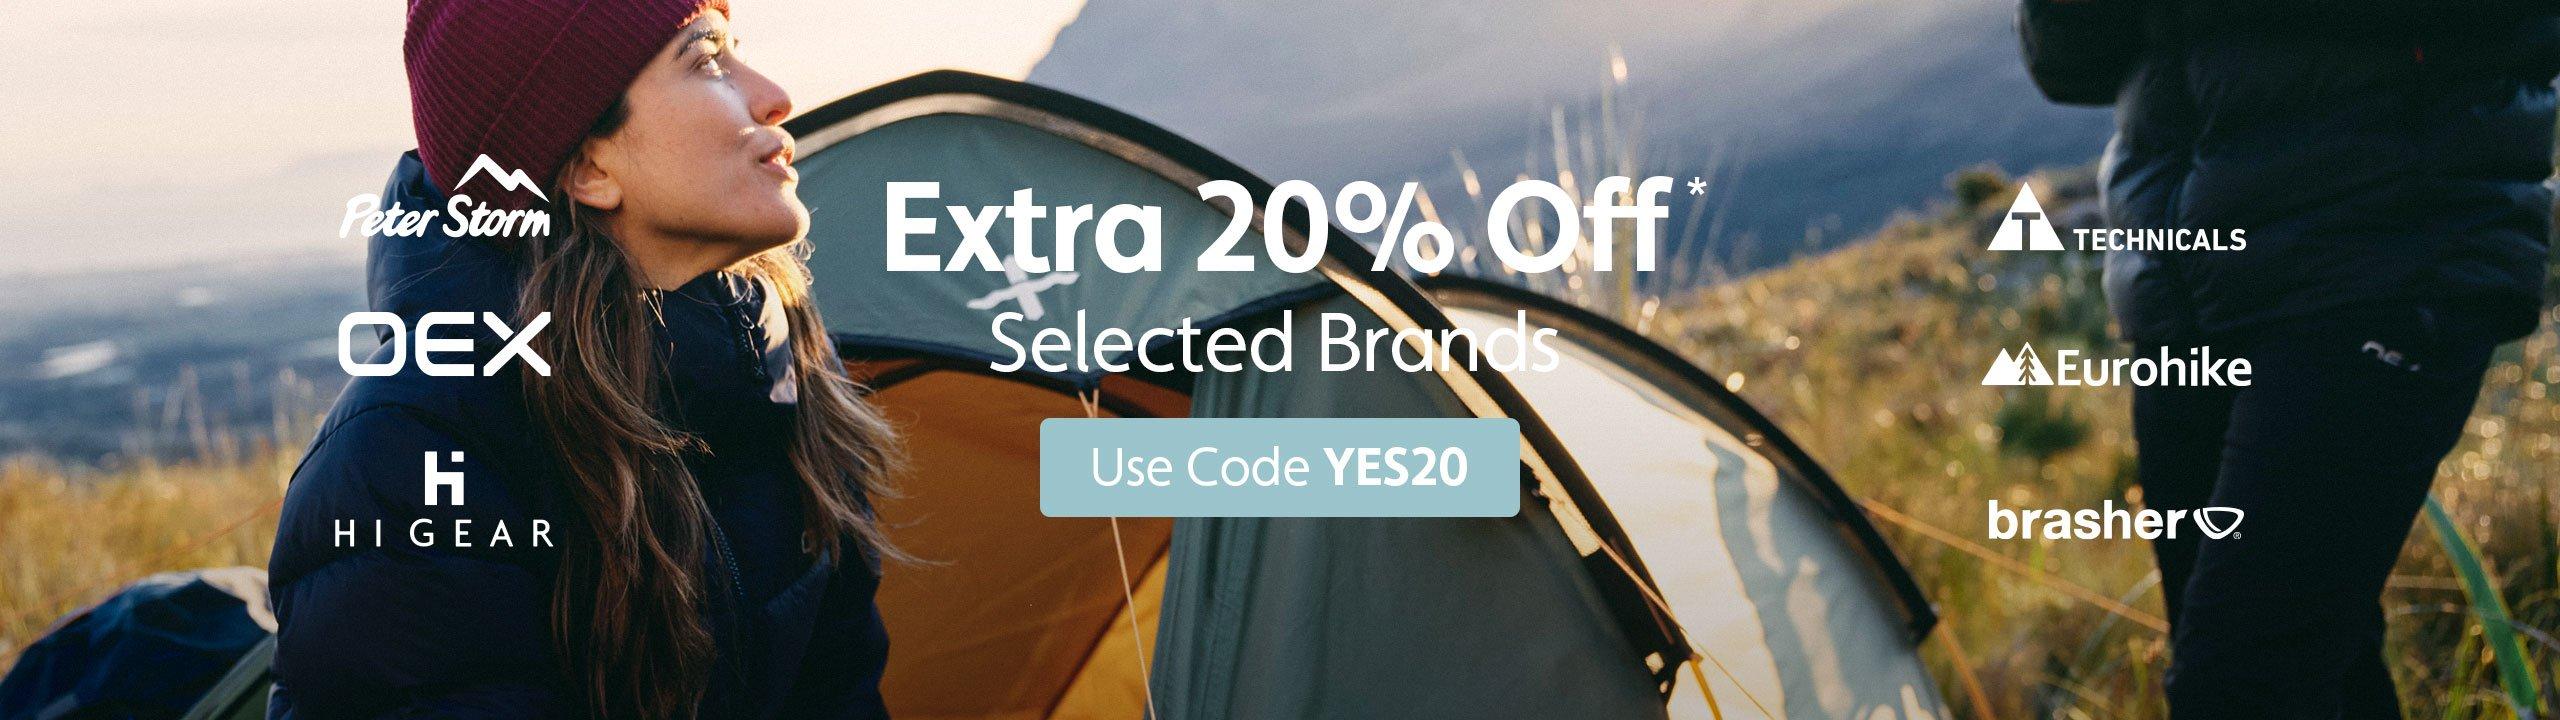 Extra 20% Off* Selected Brands – Use Code YES20